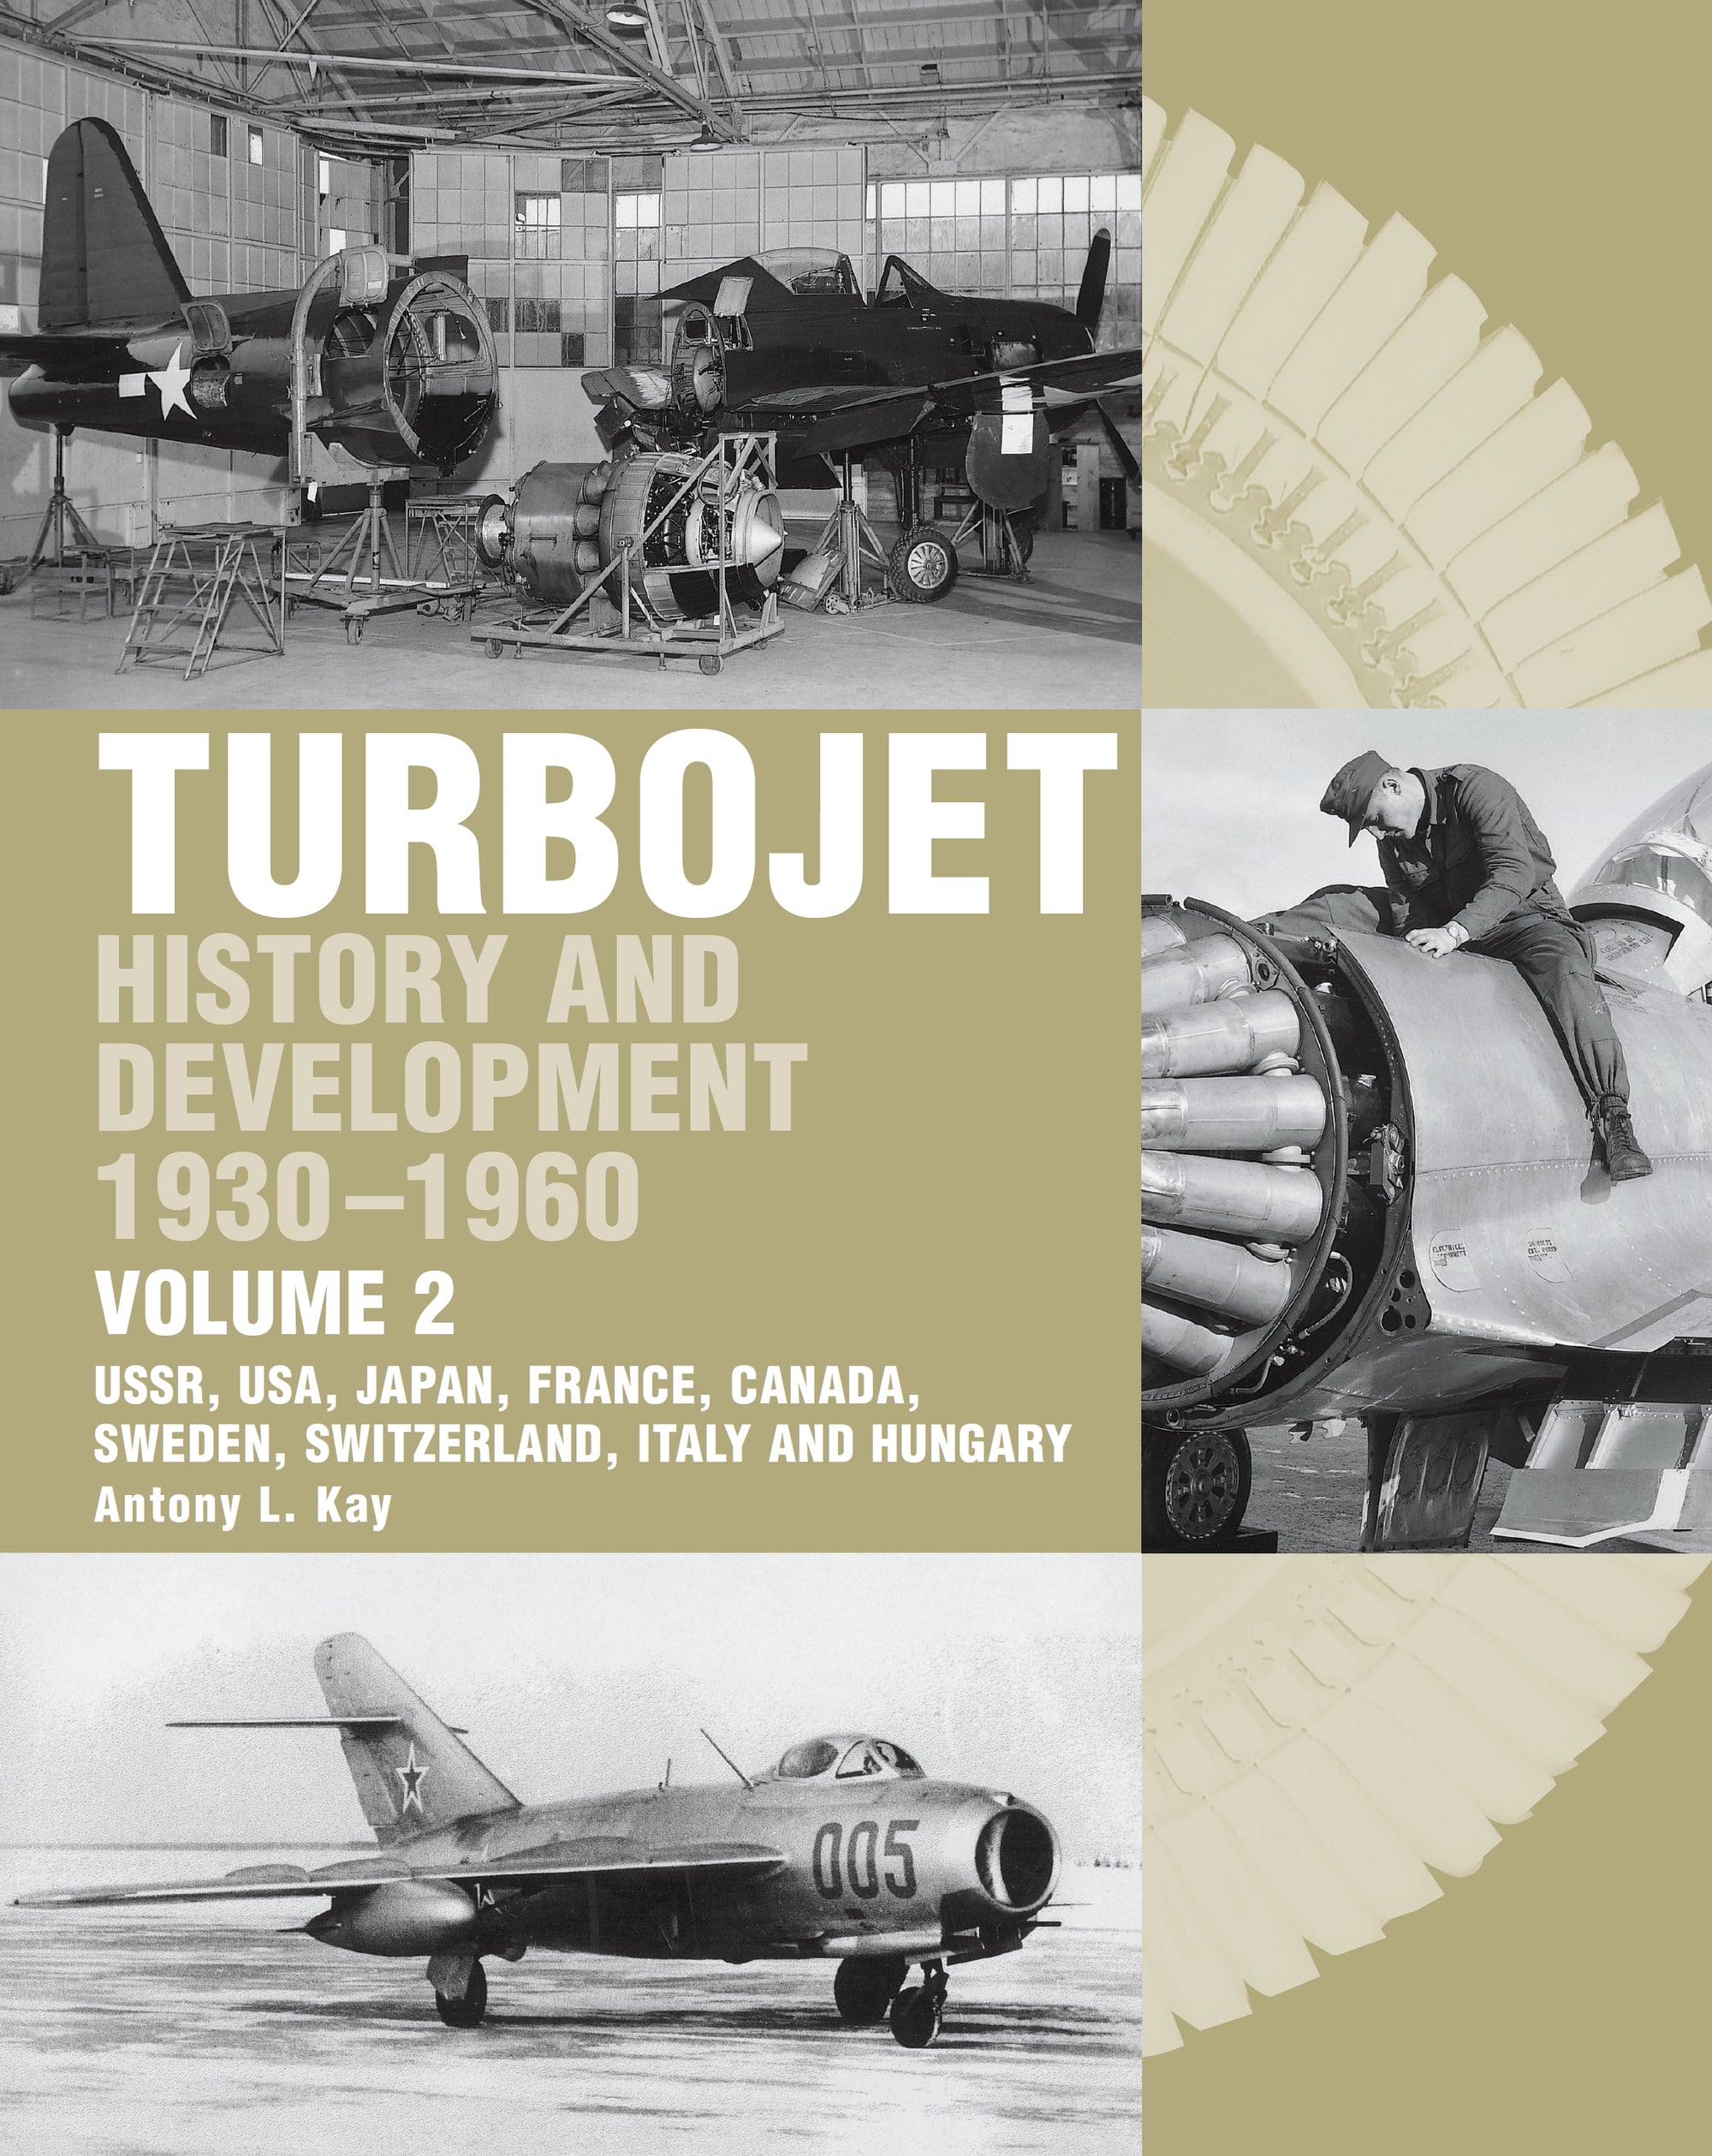 The Early History and Development of the Turbojet 1930-1960